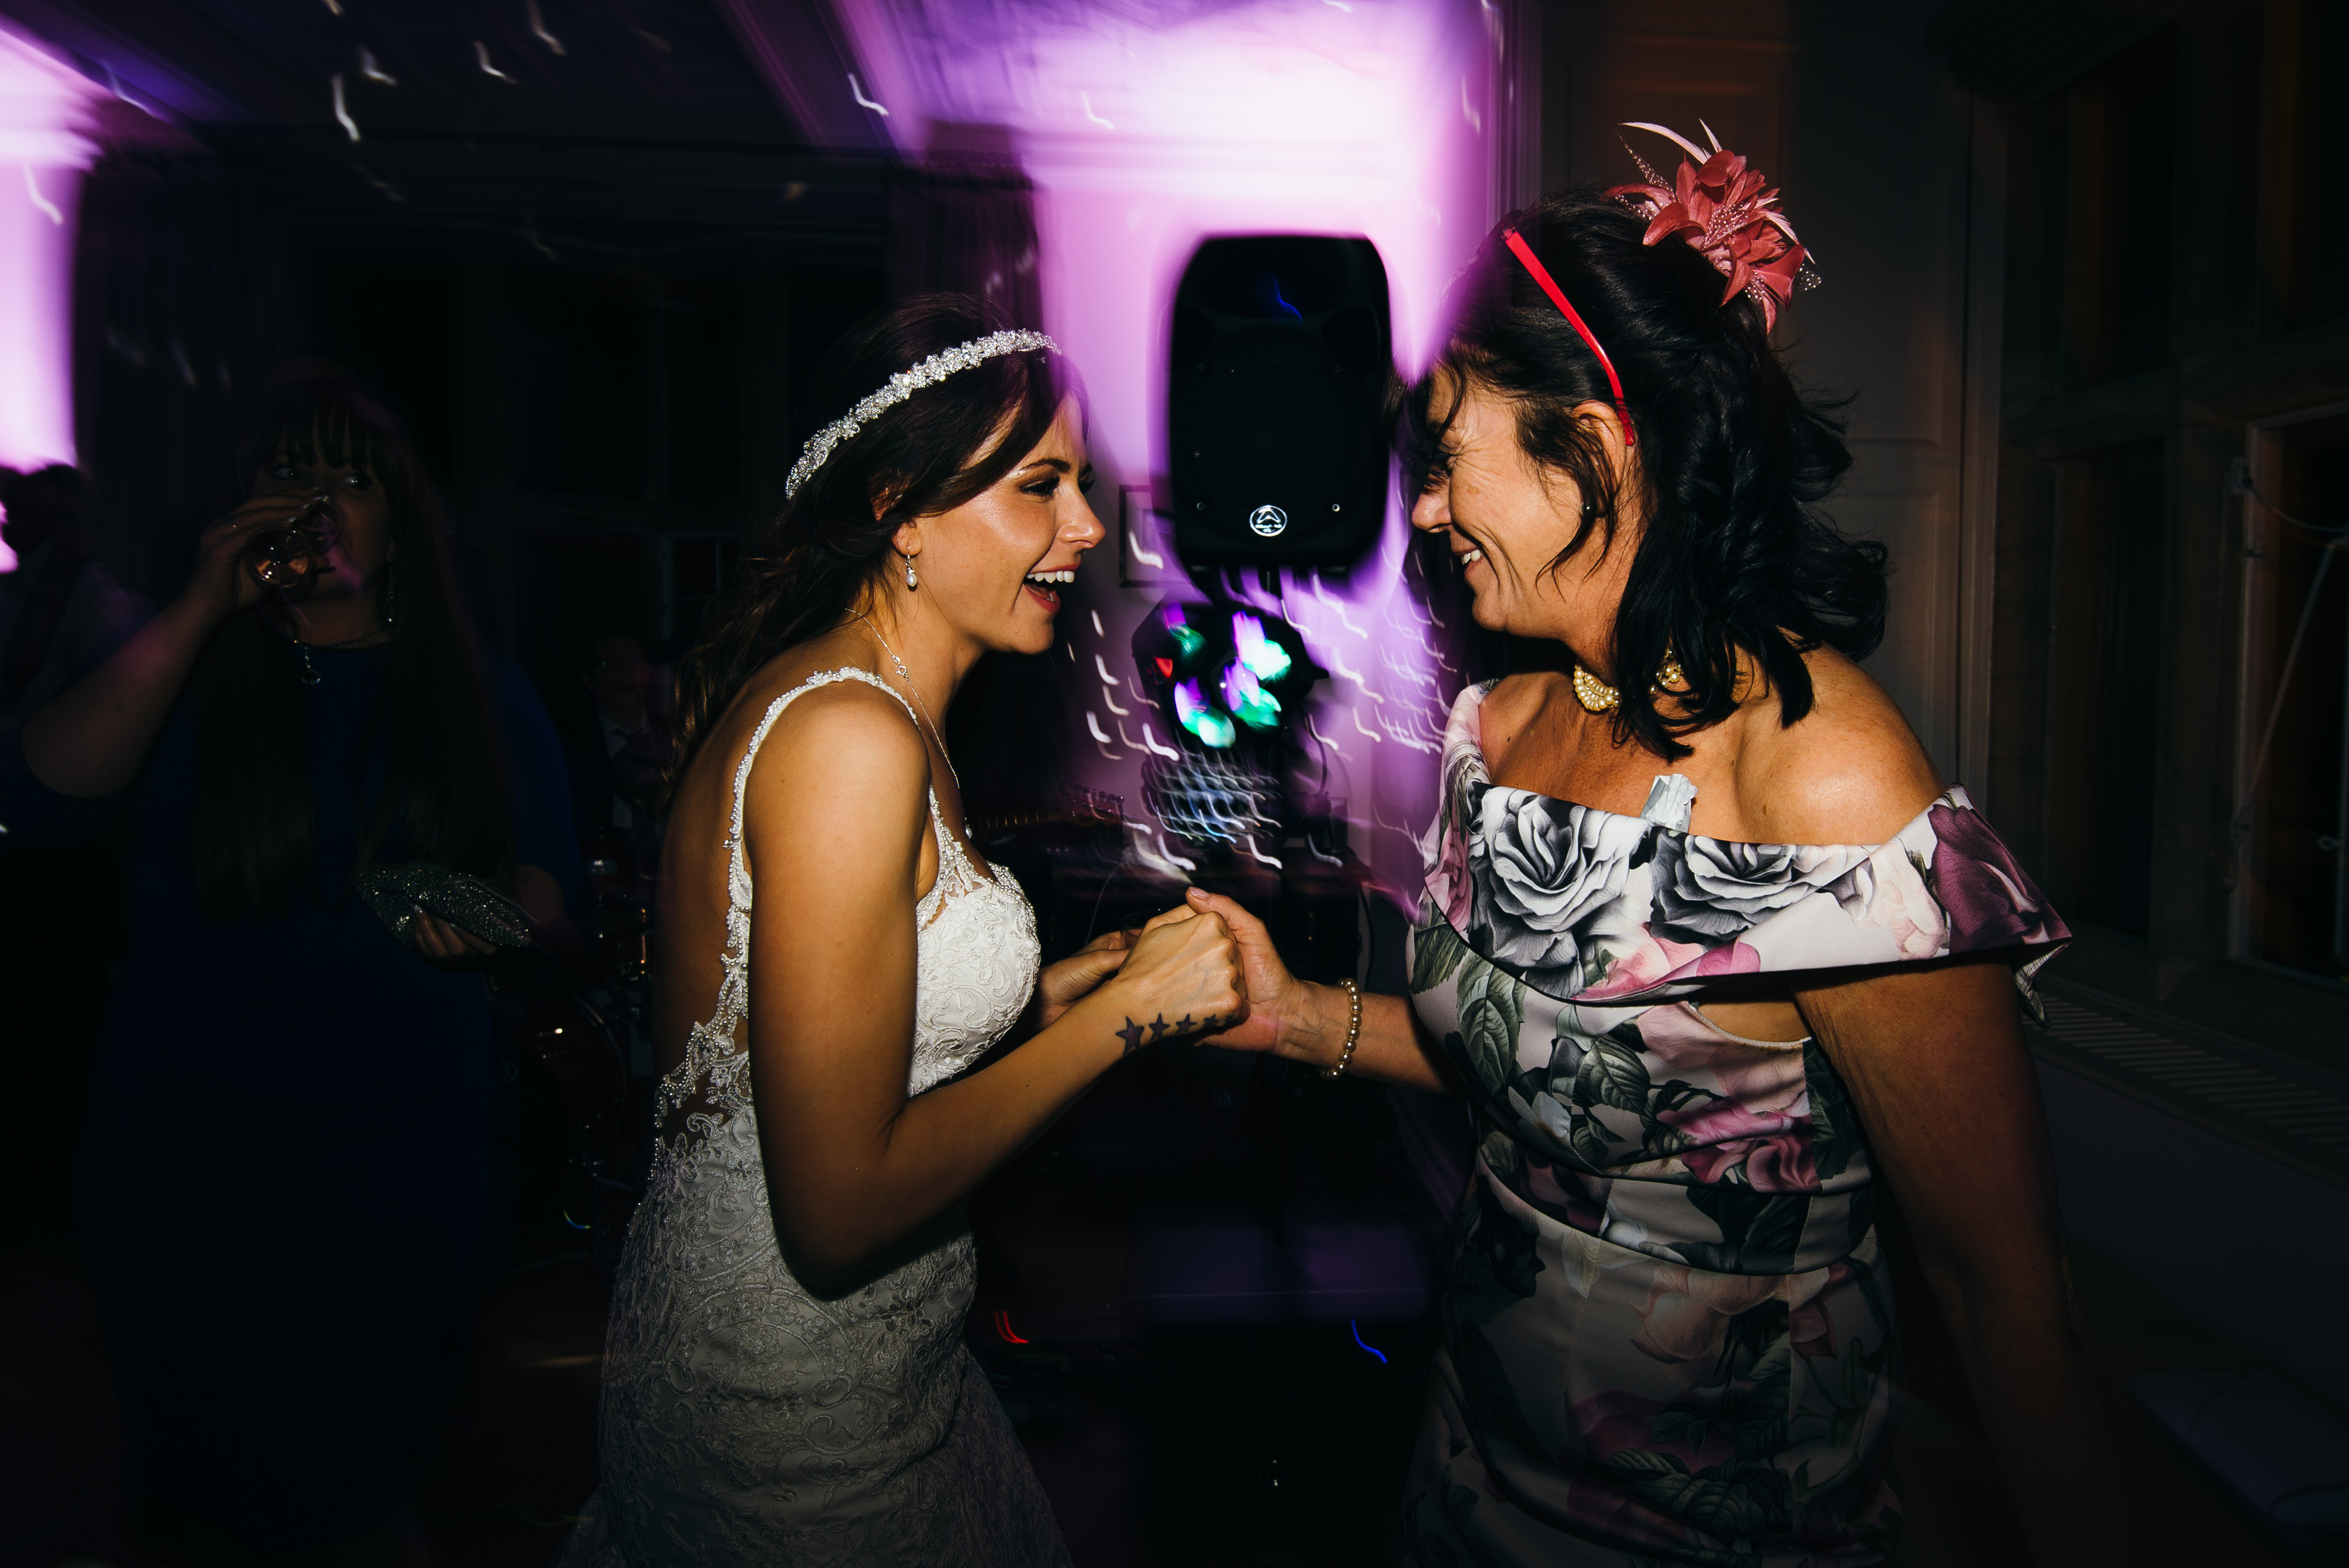 Dancing at Slaughters Manor House wedding